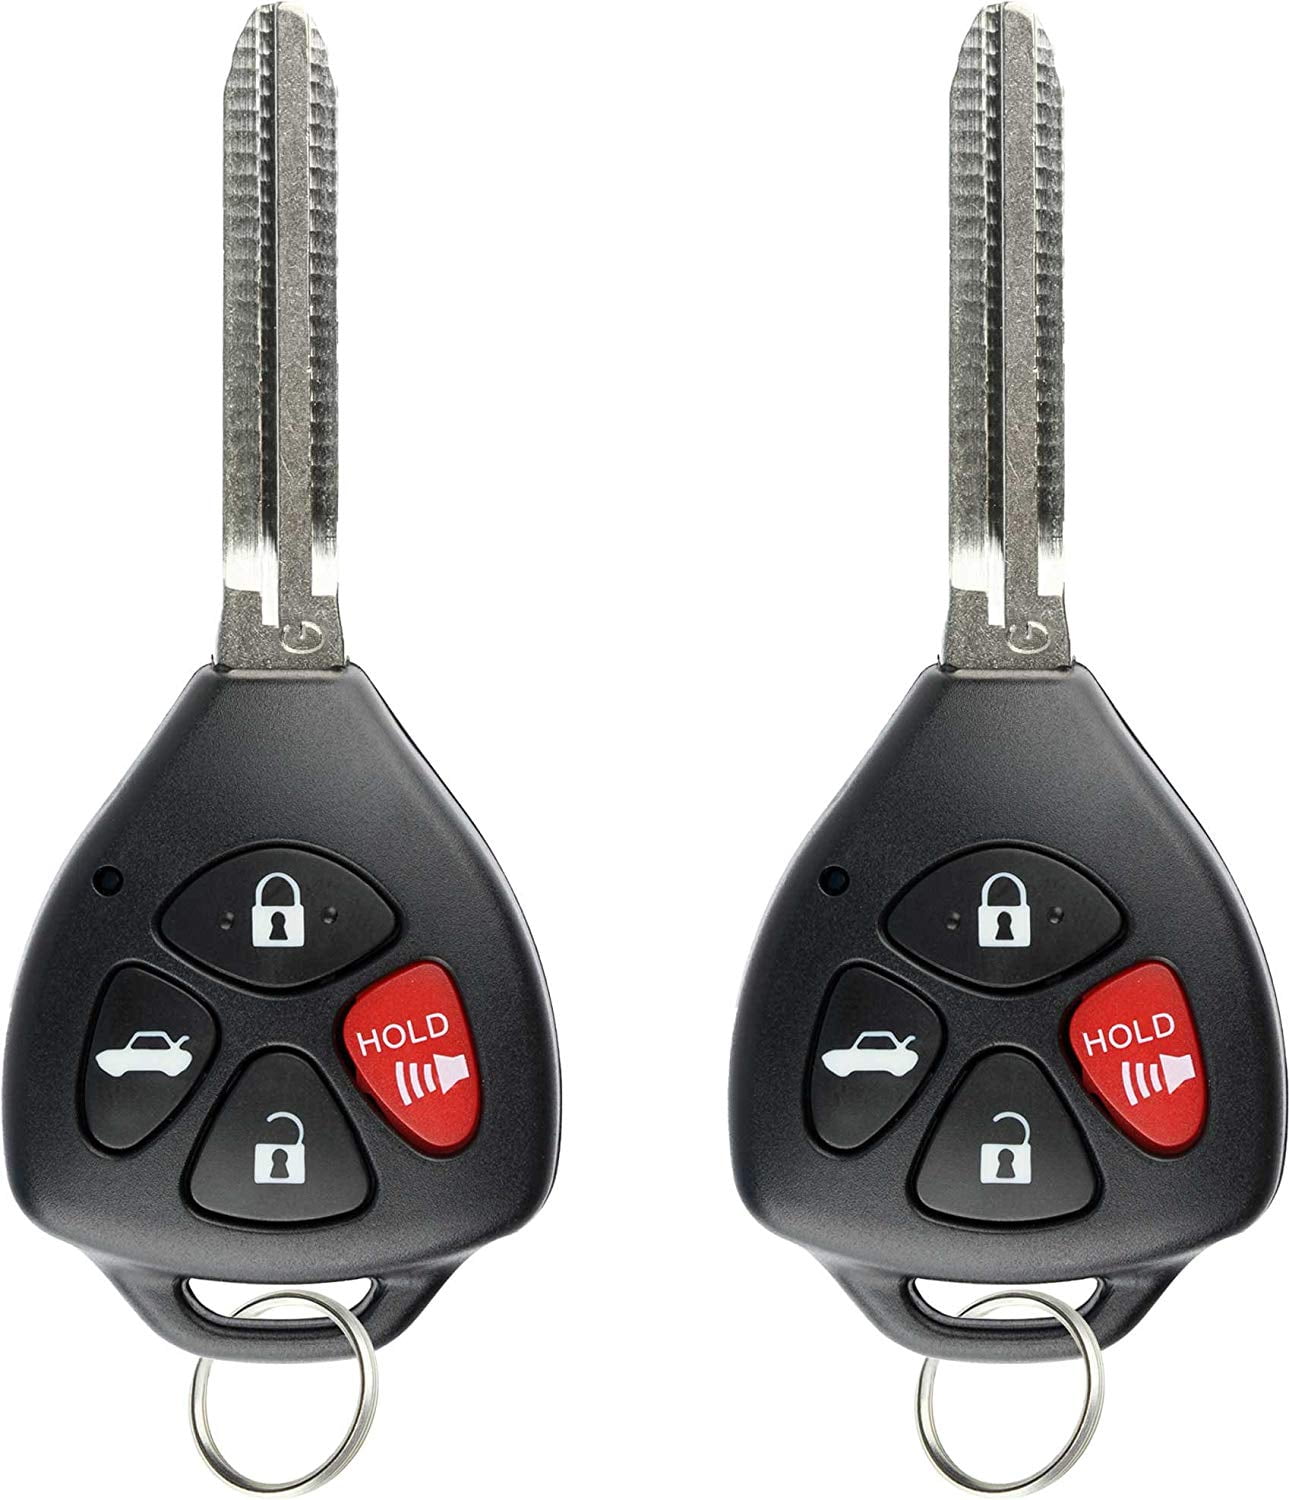 Details about   X7 style Flip key remote for 12-16 SCION FRS HYQ12BBY chip G alarm fob beeper 